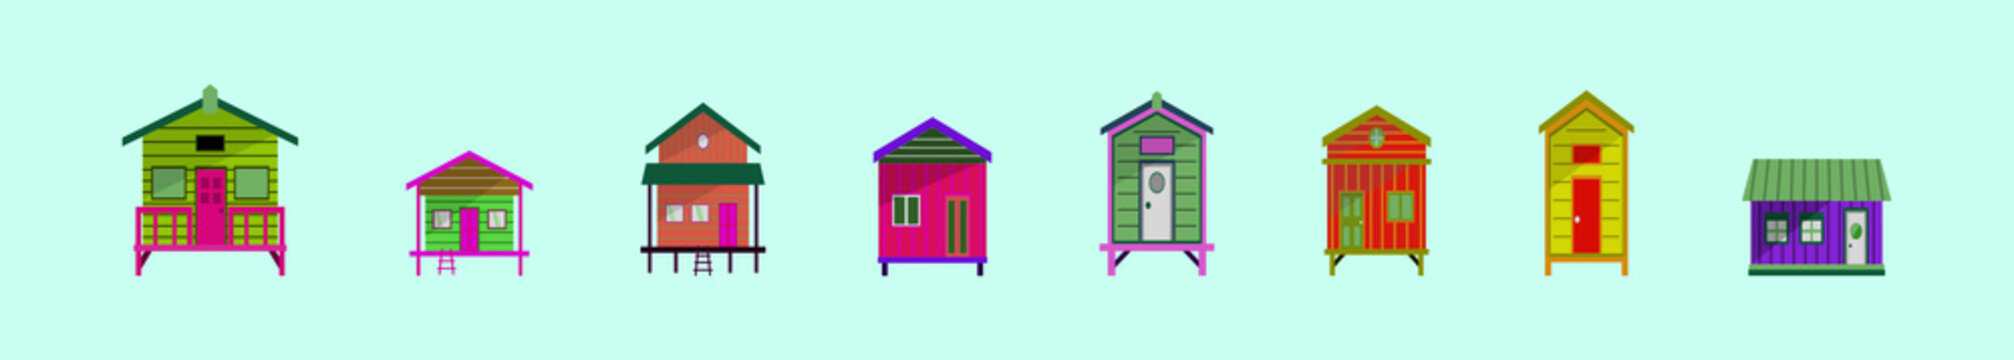 set of shack cartoon icon design template with various models. vector illustration isolated on blue background